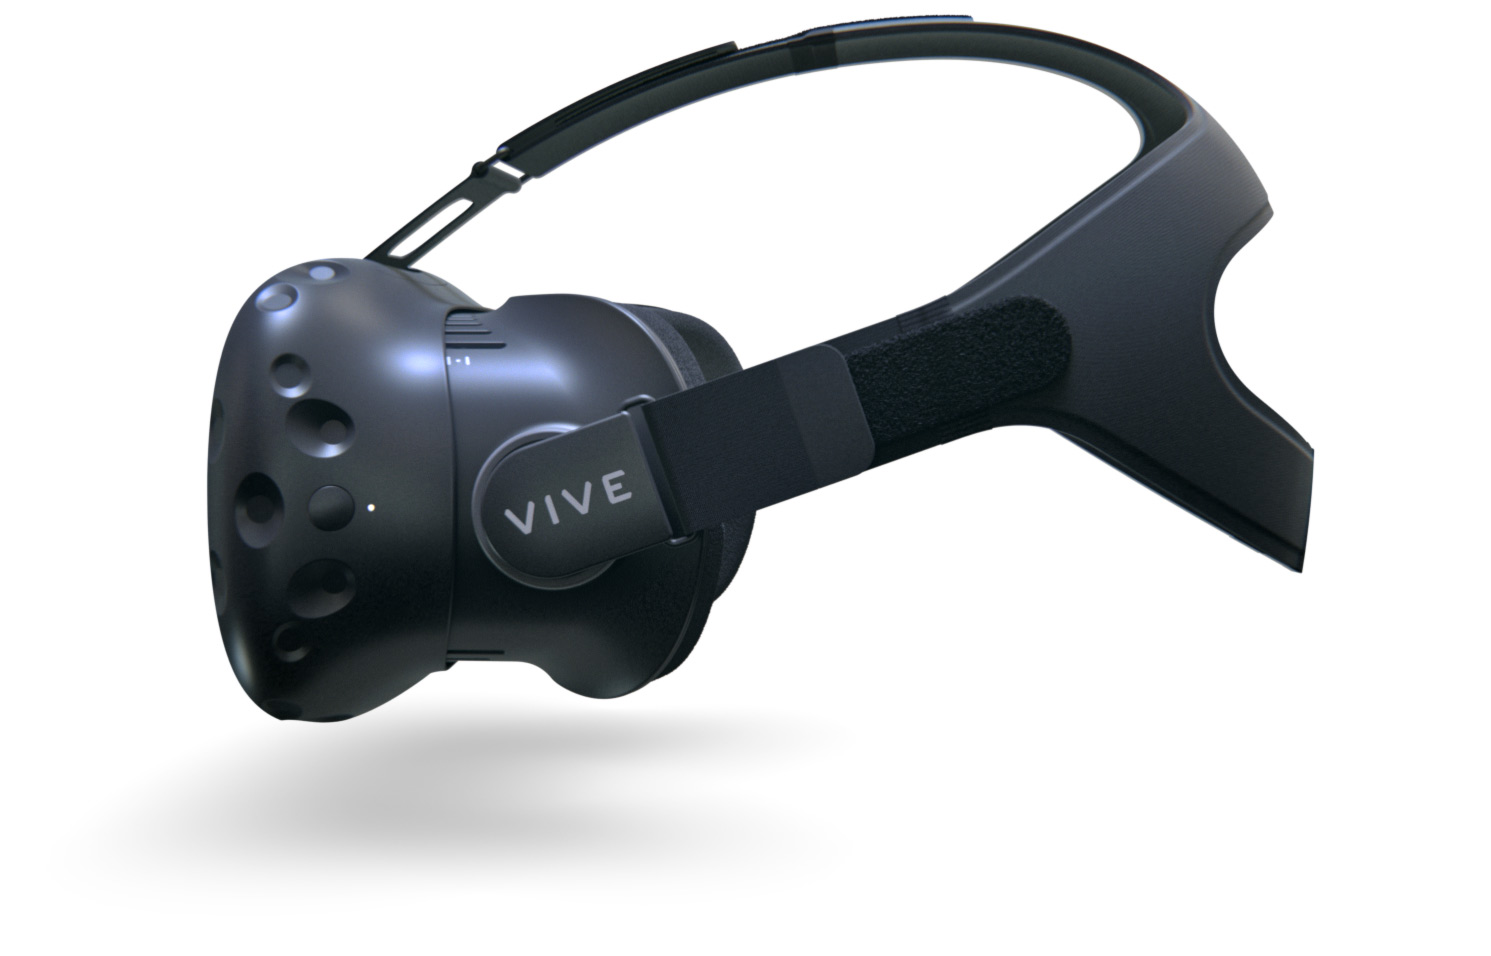 HTC-Vive-Headset-Consumer-Launch-Side